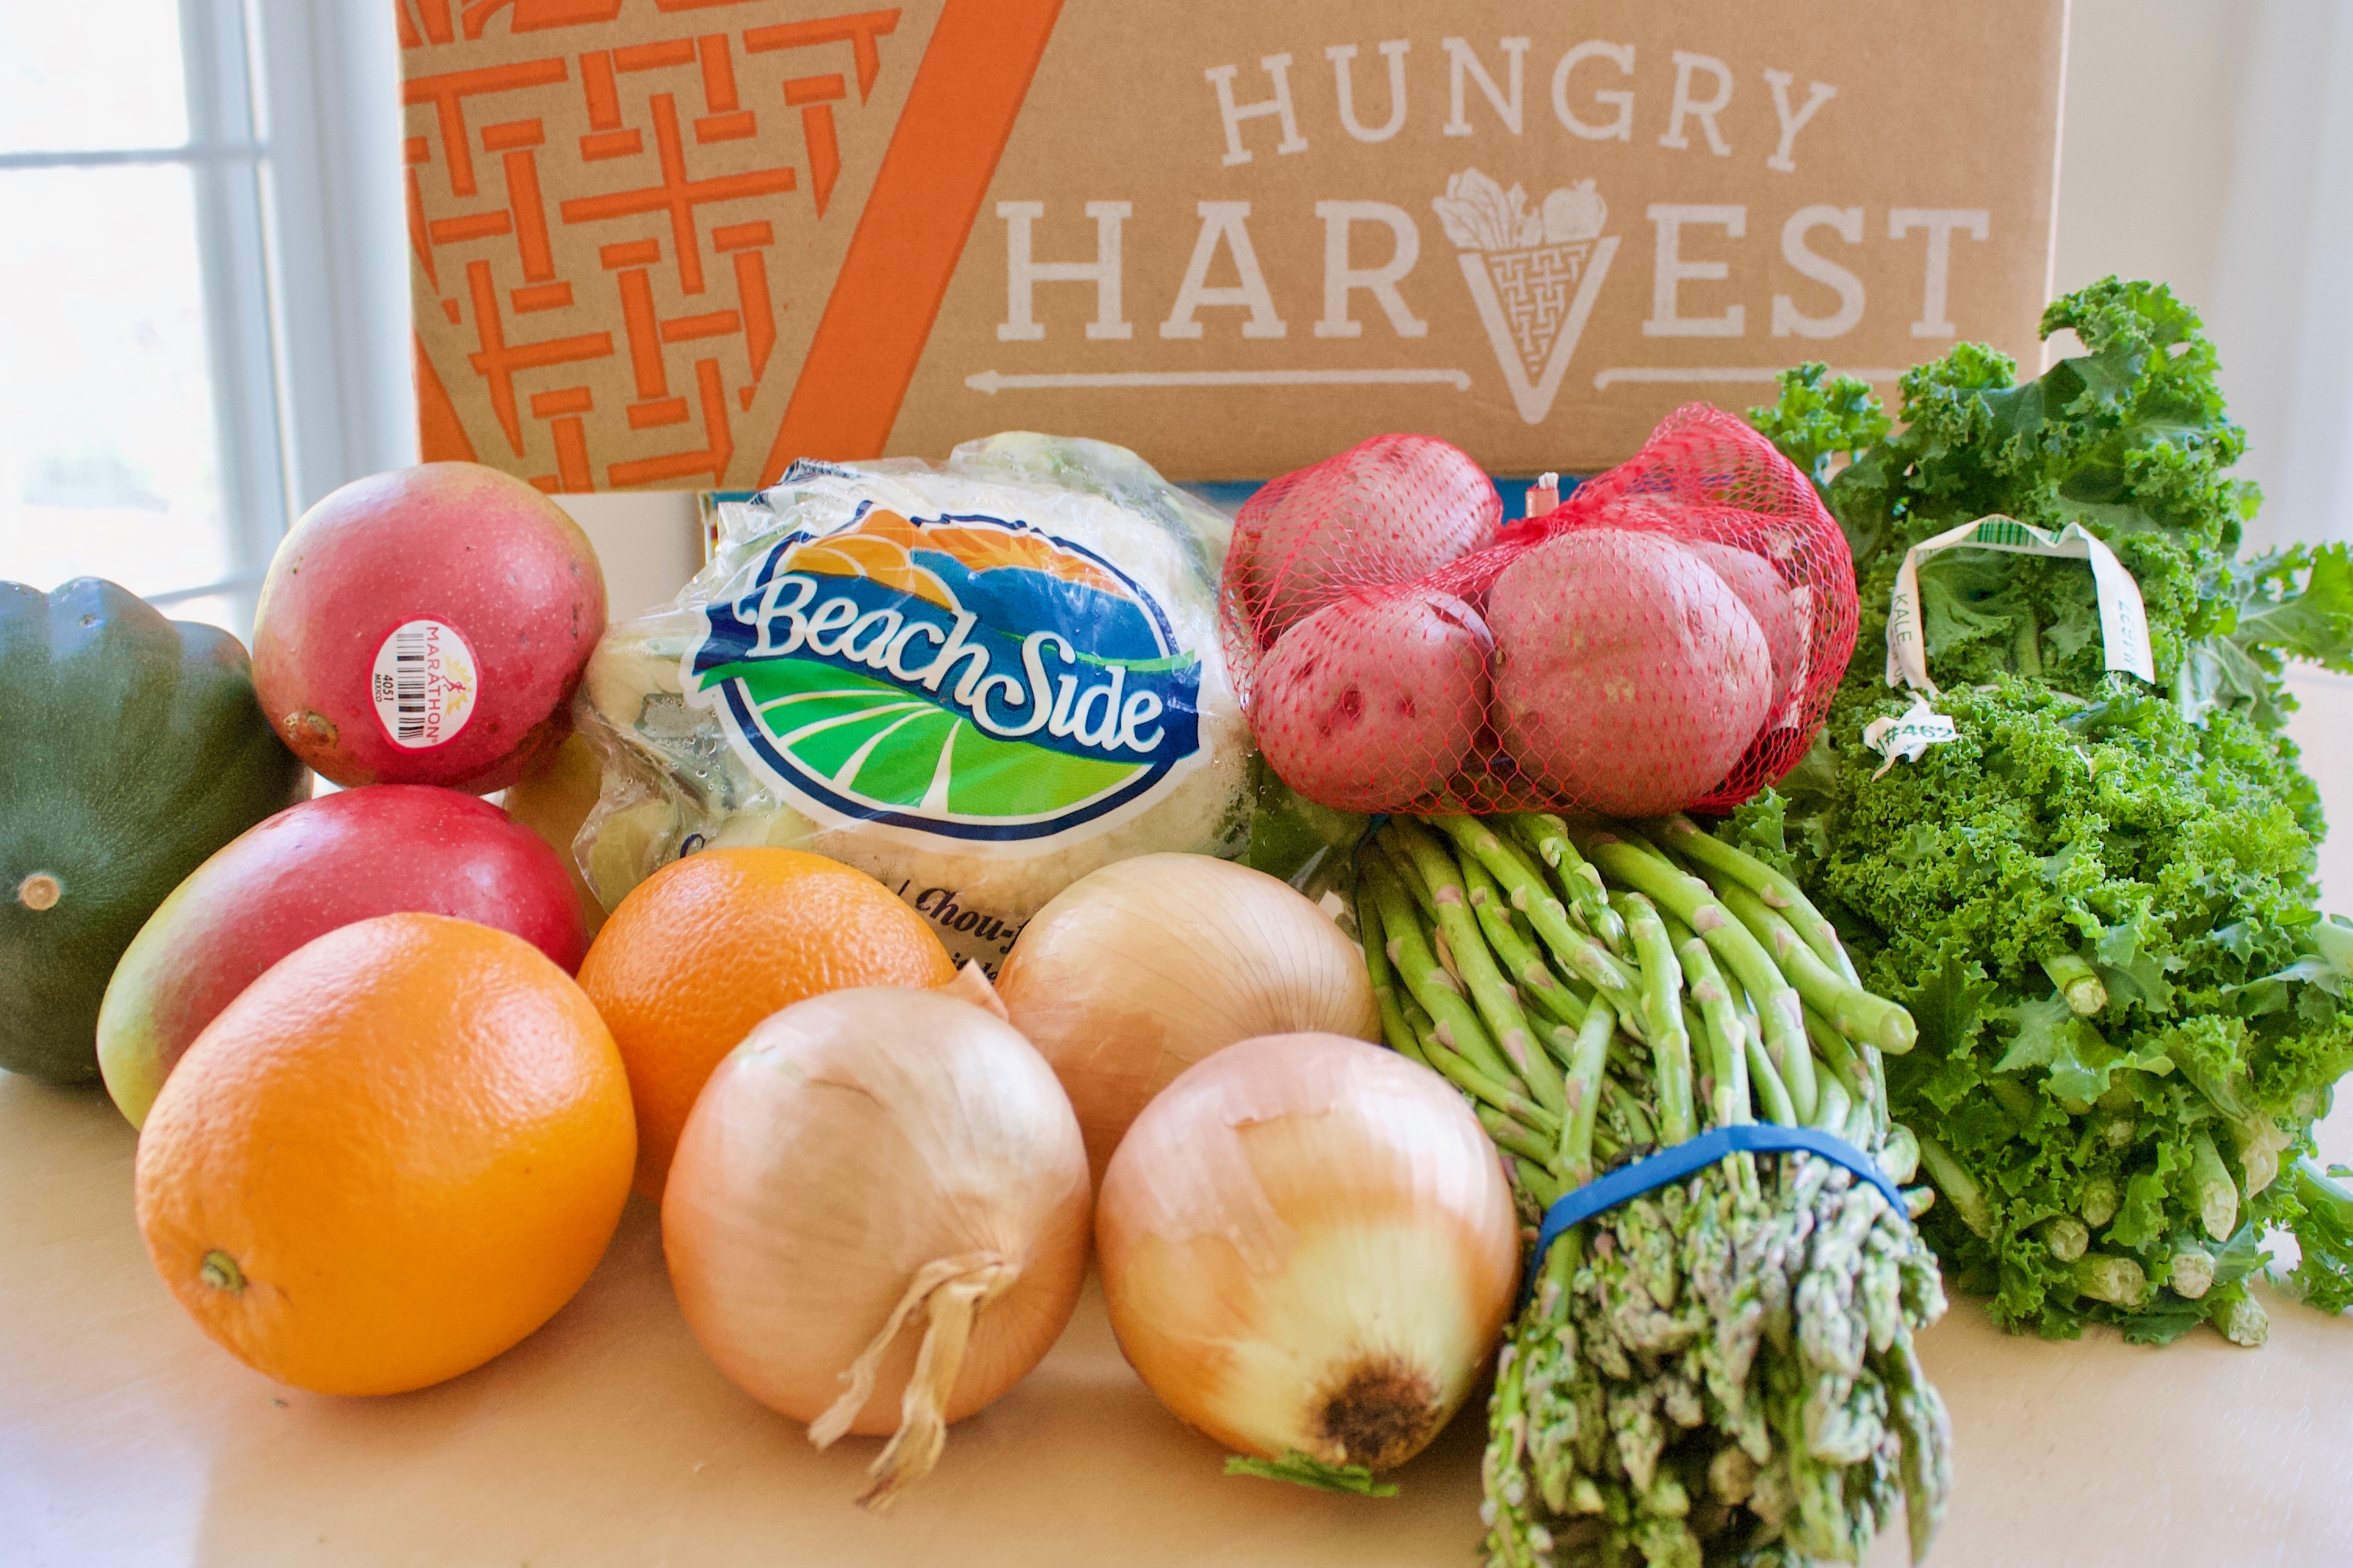 Hungry Harvest Review